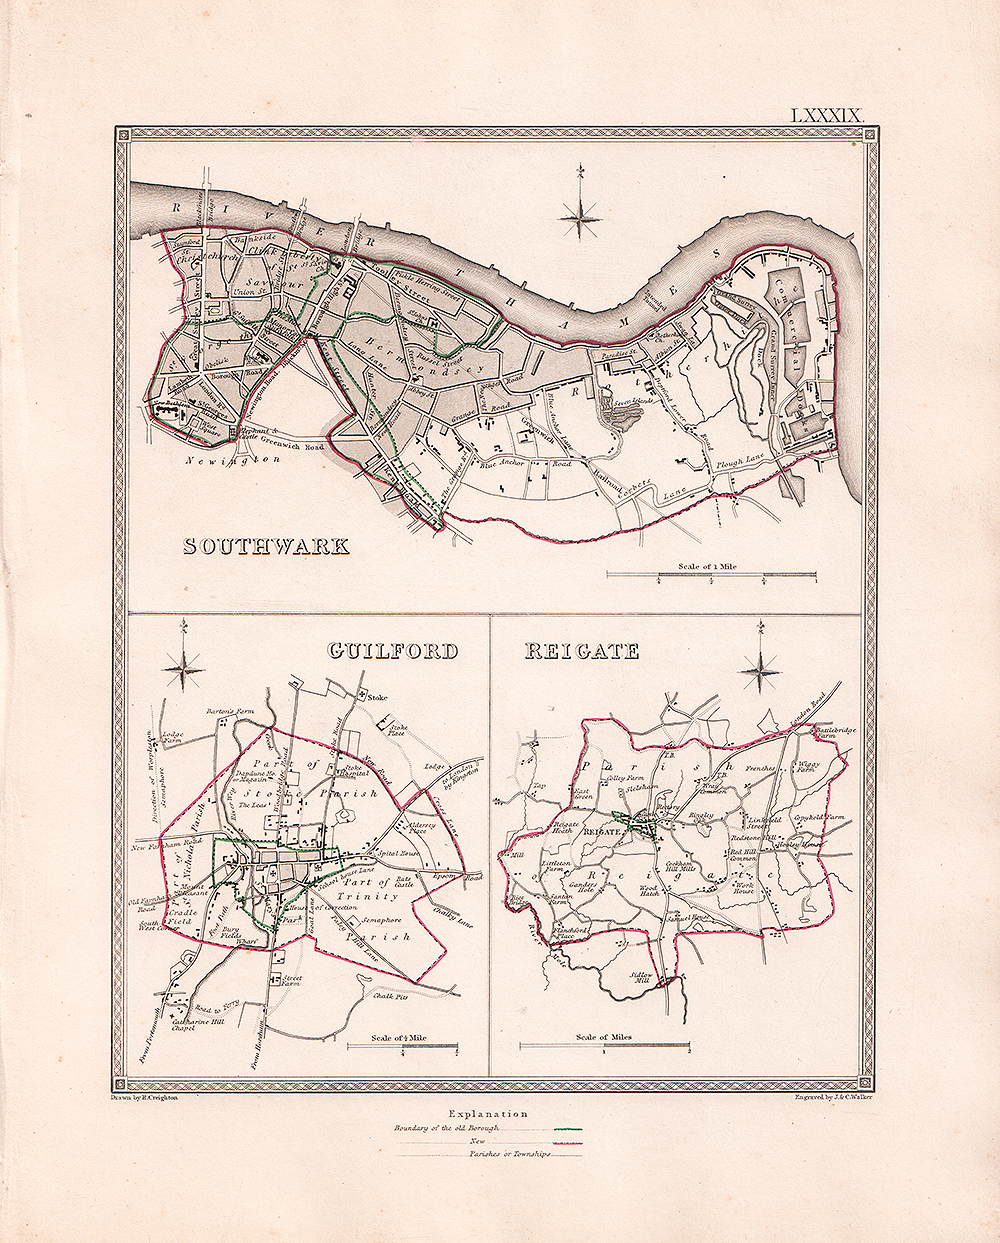 J. and C. Walker - Southwark, Guilford and Reigate.